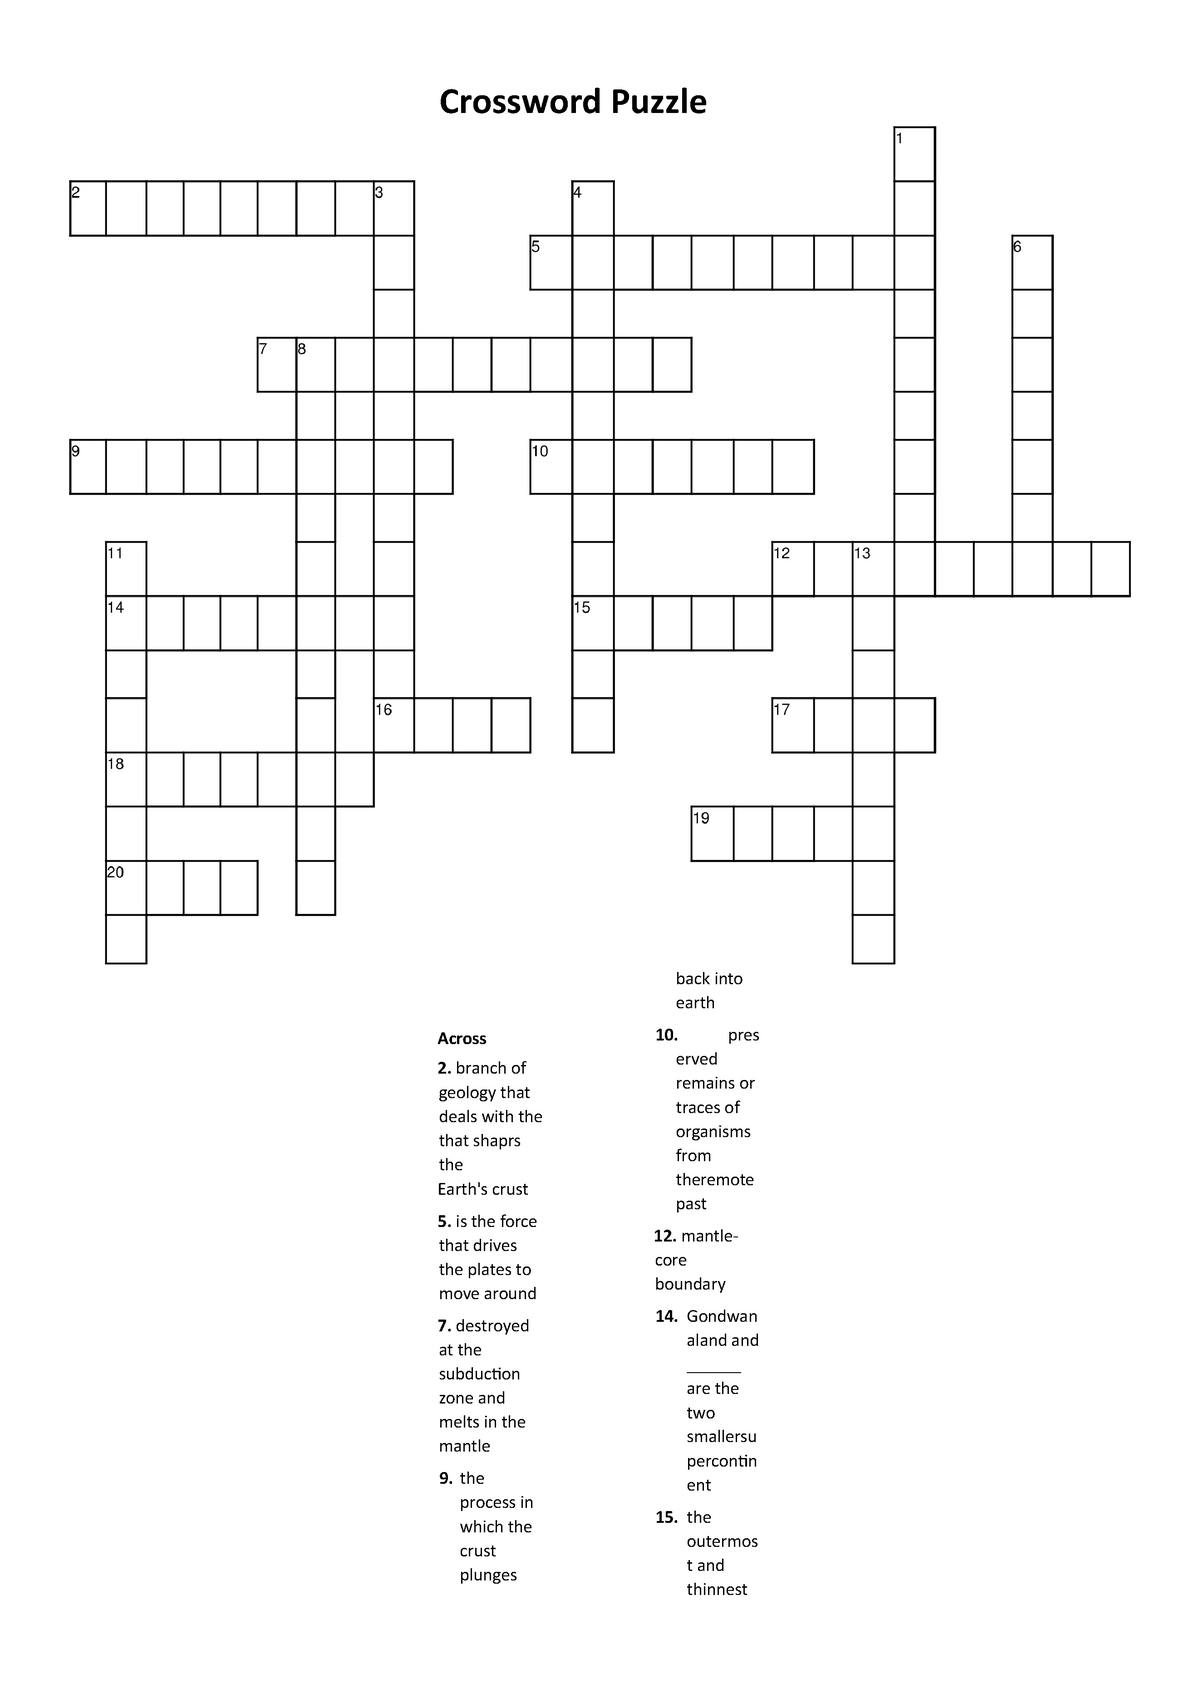 Crossword True or False 1 Income form business is a passive income 2